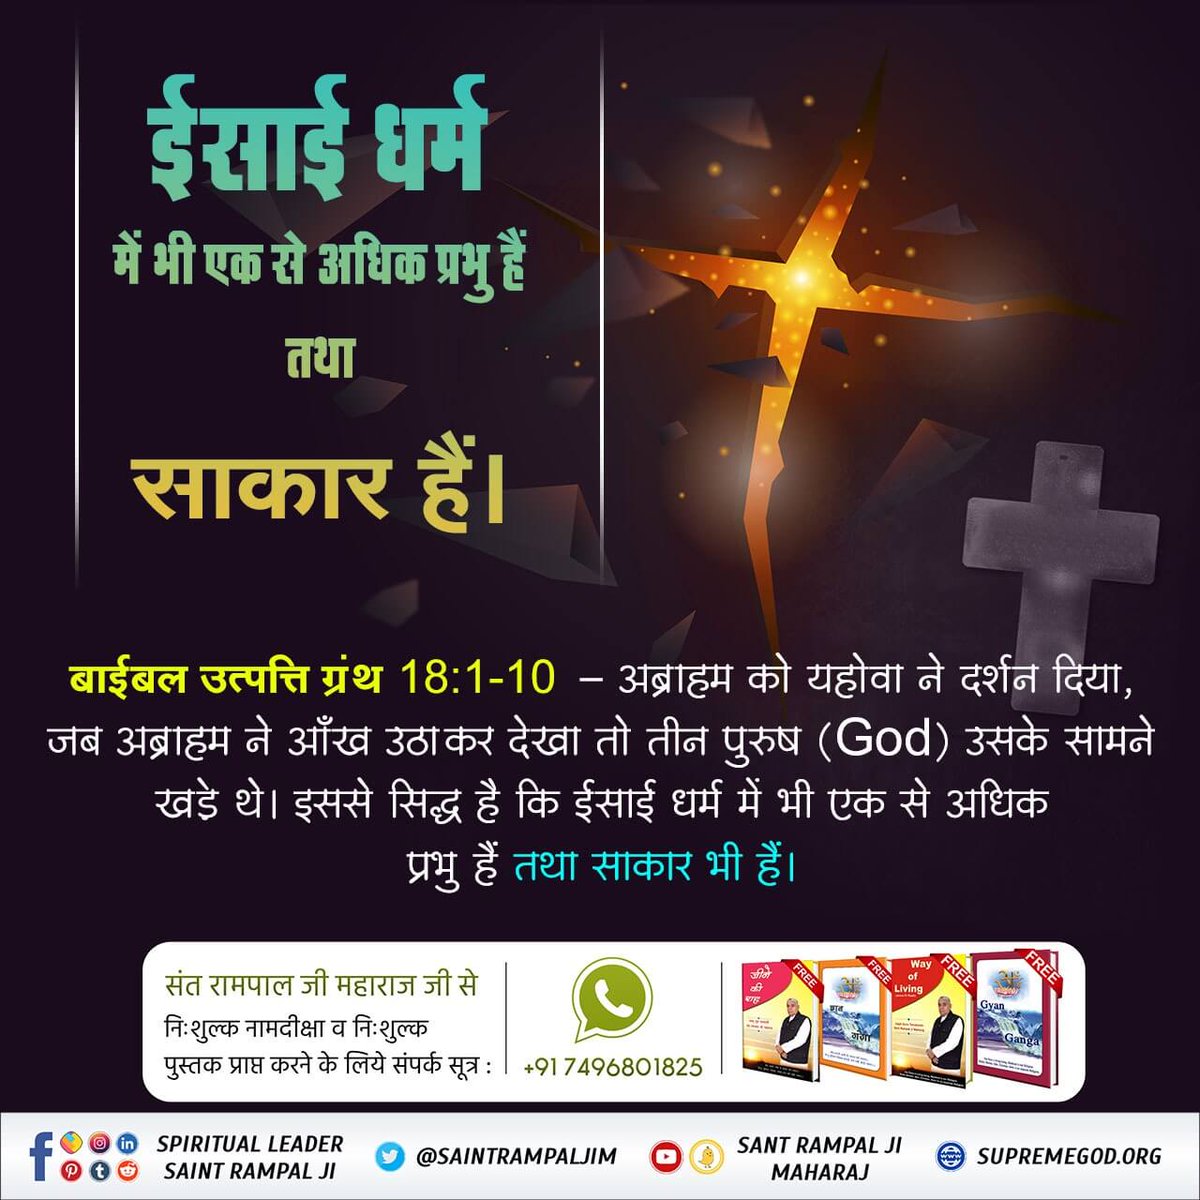 #GodMorningFriday
In Christianity also there is more than one God and there are corporeals.
 Bible Genesis 18:1-10 - Jehovah appeared to Abraham, when Abraham raised his eyes and saw three men (God) standing in front of him.
Visit Satlok Ashram YouTube Channel
#fridaymorning